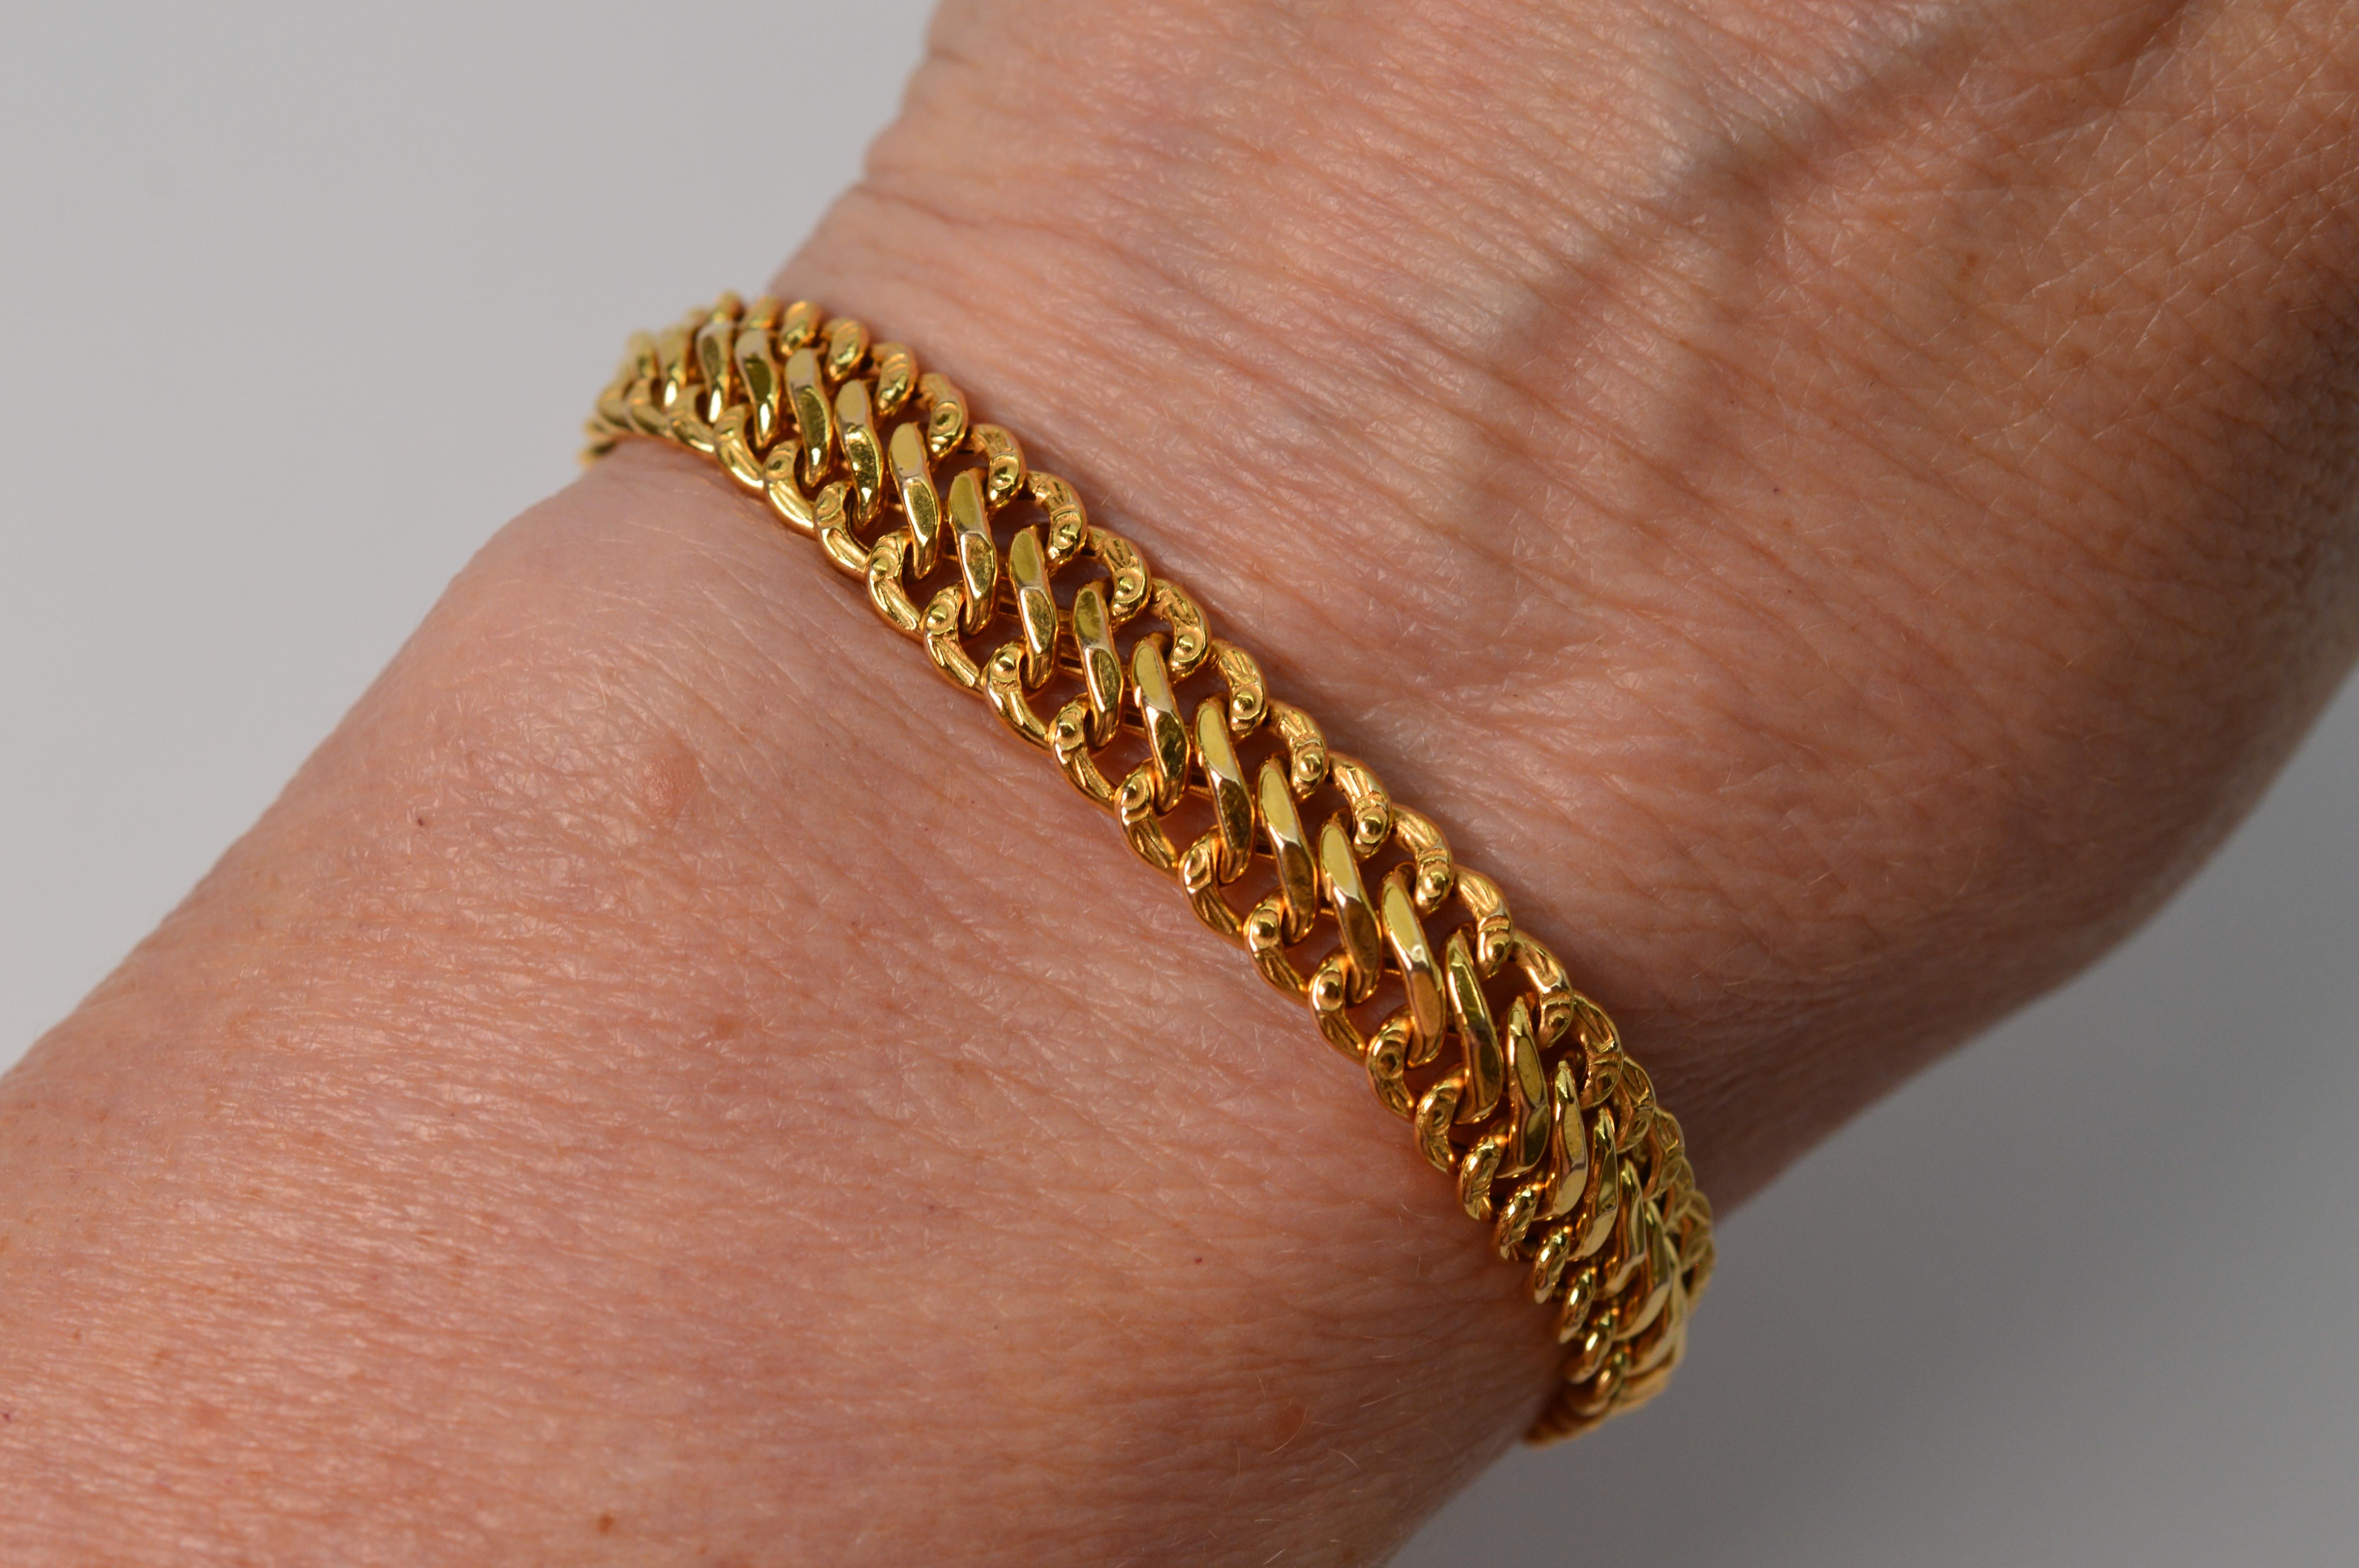 Versatile fourteen karat 14K Italian-made yellow gold chain bracelet fabulous to wear on its own or just the right width for stacking. The fancy Bismarck style chain gives this piece a stylish, dressy look. The bracelet's length is 7 1/2 inches and